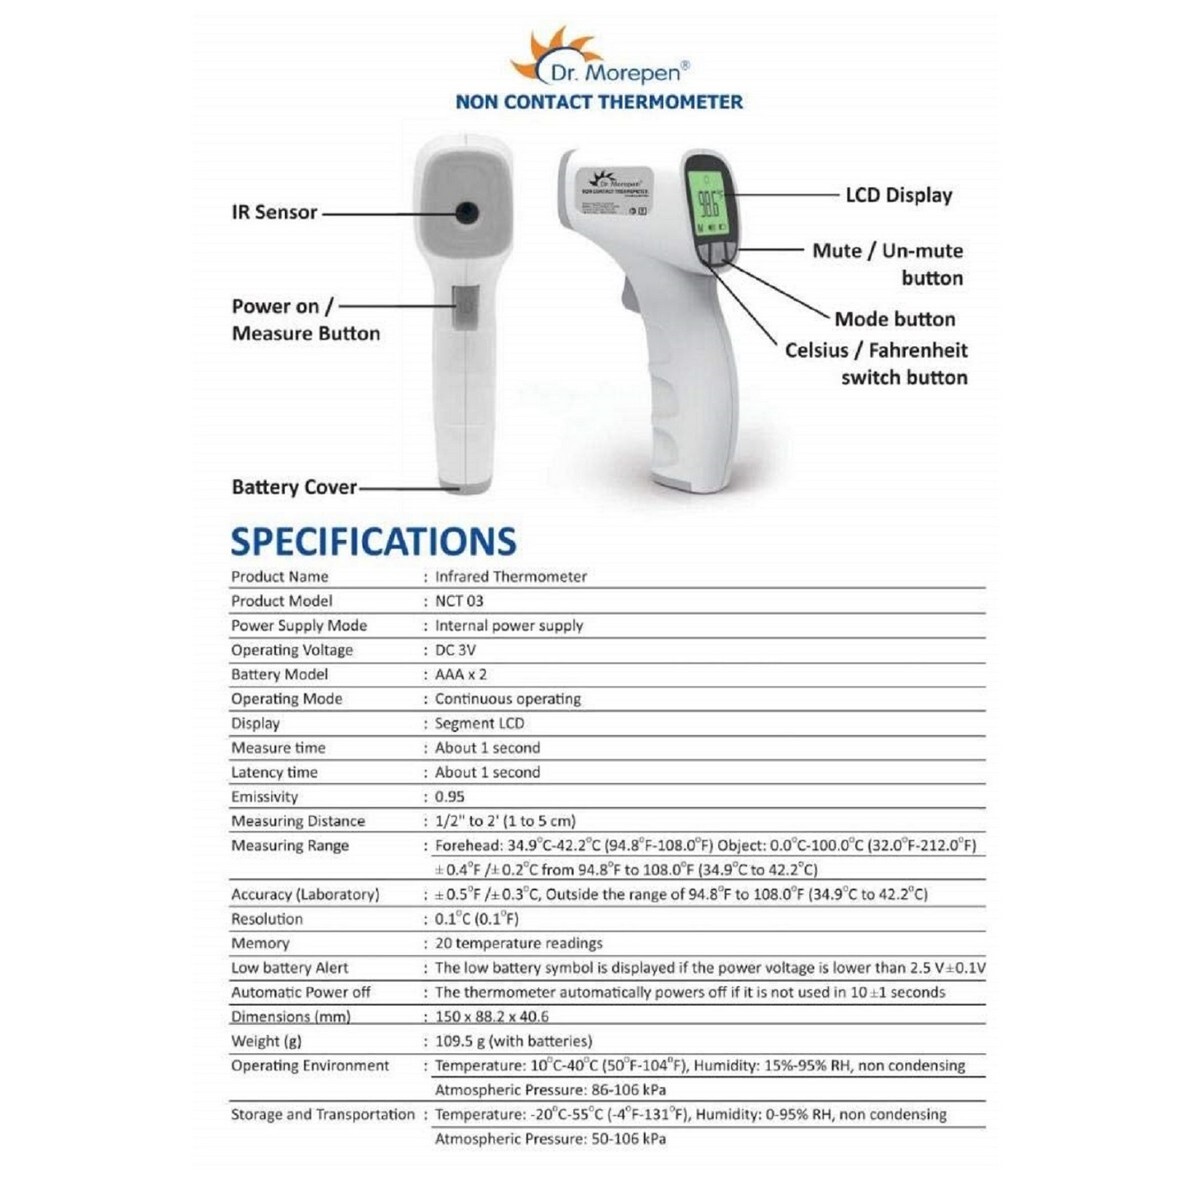 Jumper JPD-FR202 Non-Contact Infrared Thermometer in the USA and India